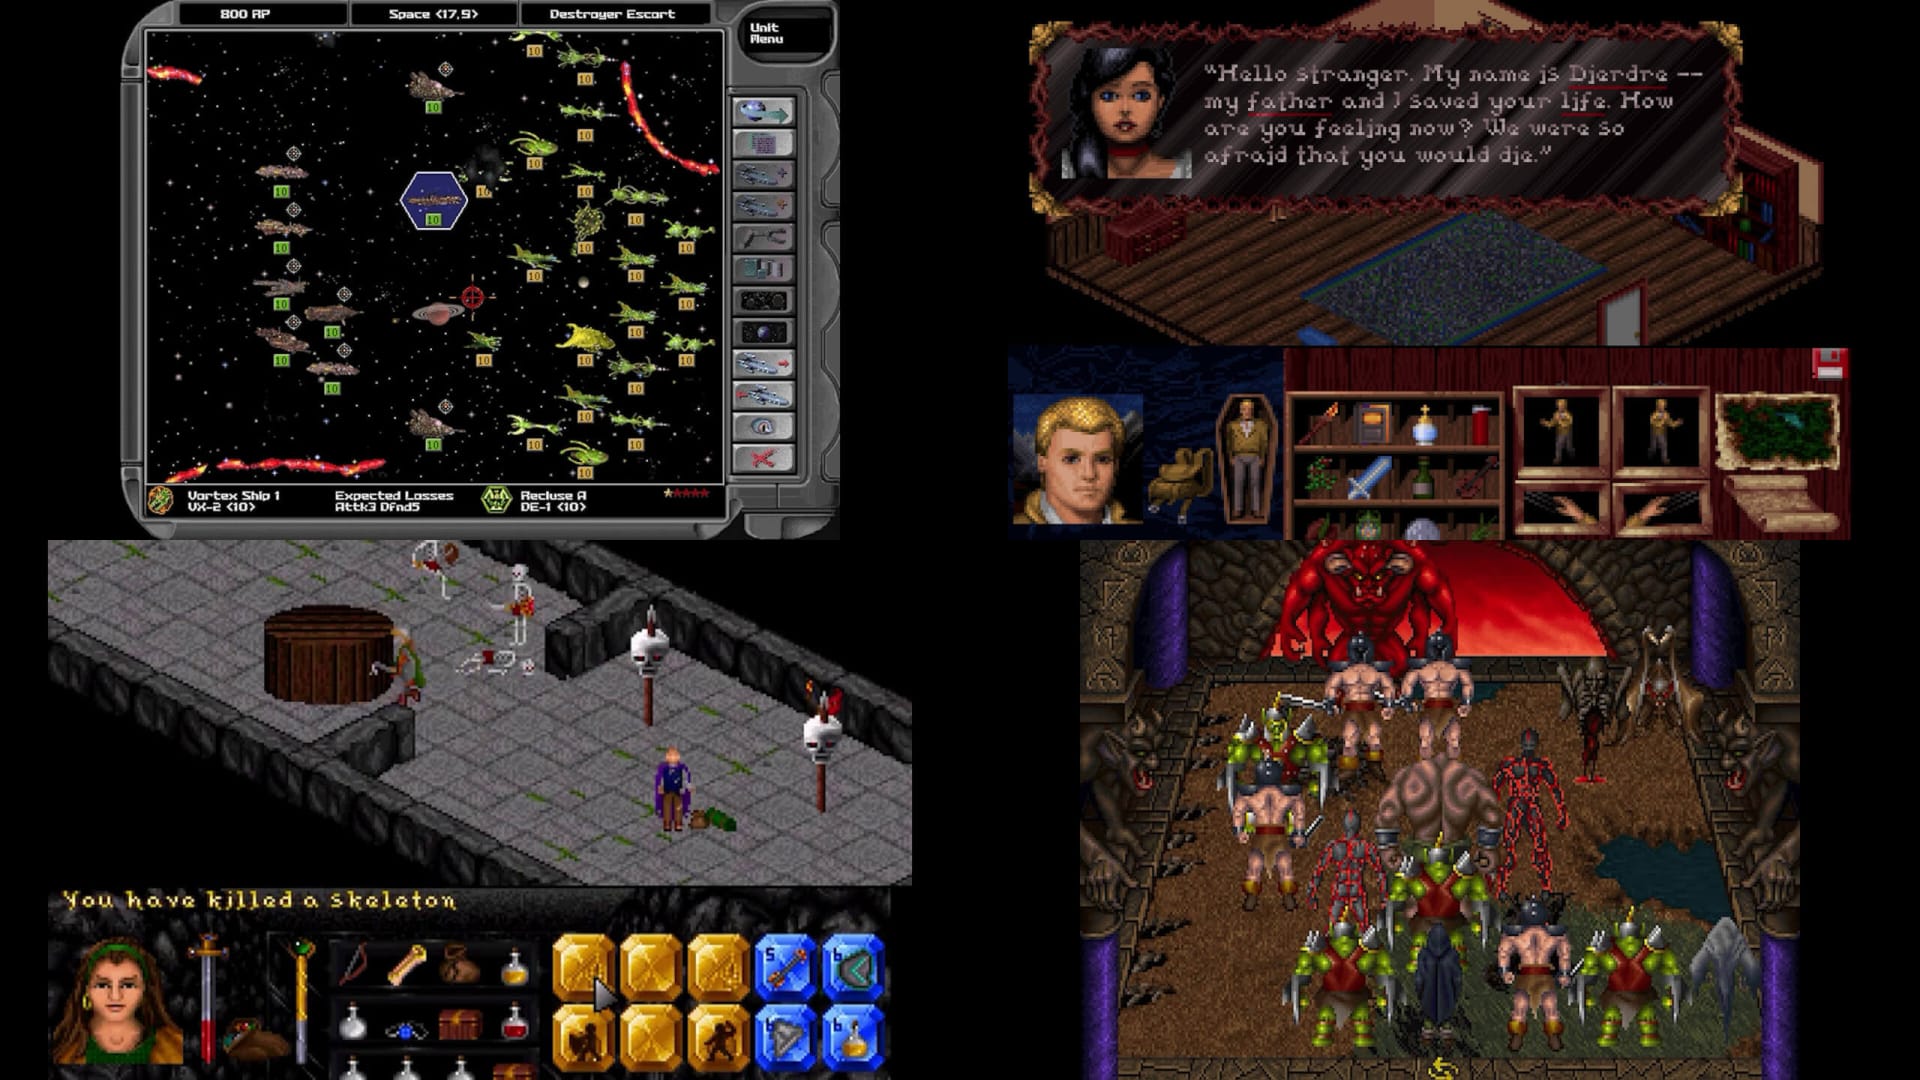 The four retro classics being revived by SNEG - Veil of Darkness, Dark Legions, The Summoning, and Star General